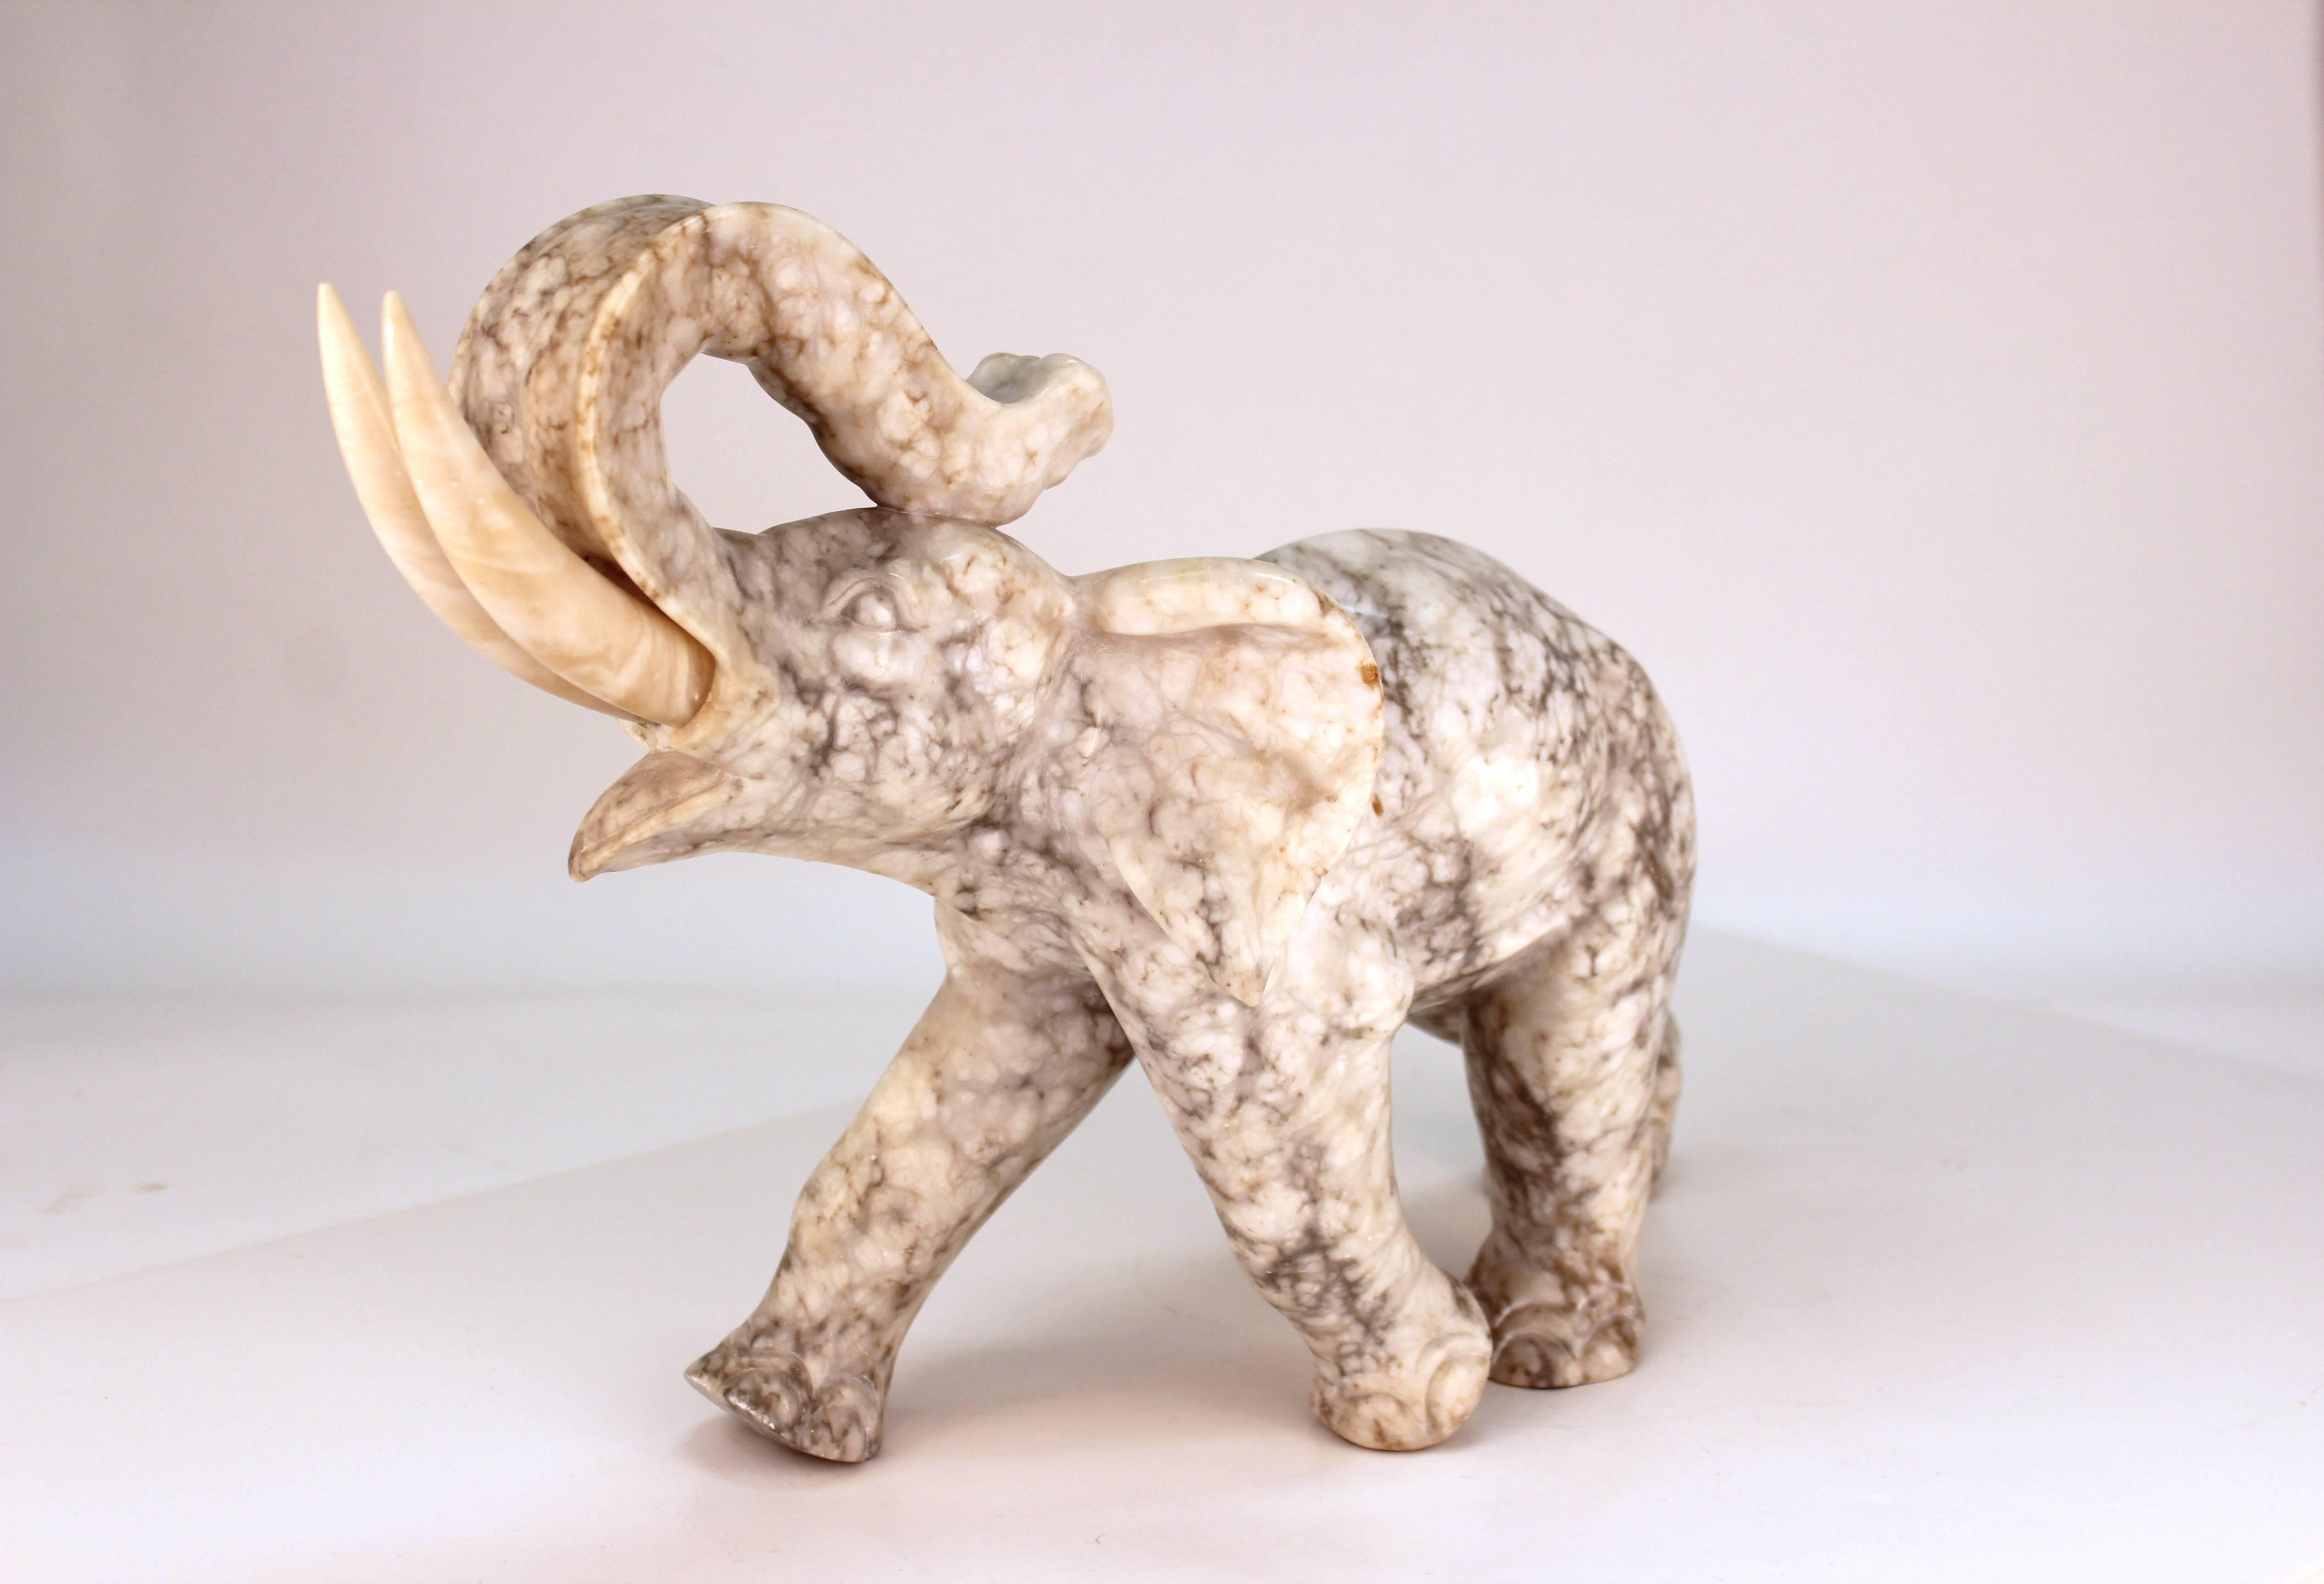 A Mid-Century Modern elephant figure carved in marble, with tusks made of alabaster. Both tusks are removable. One tusk had screw end restored. Breaks and cracks to both tusk insert holes. Small chip on back of elephant ear.